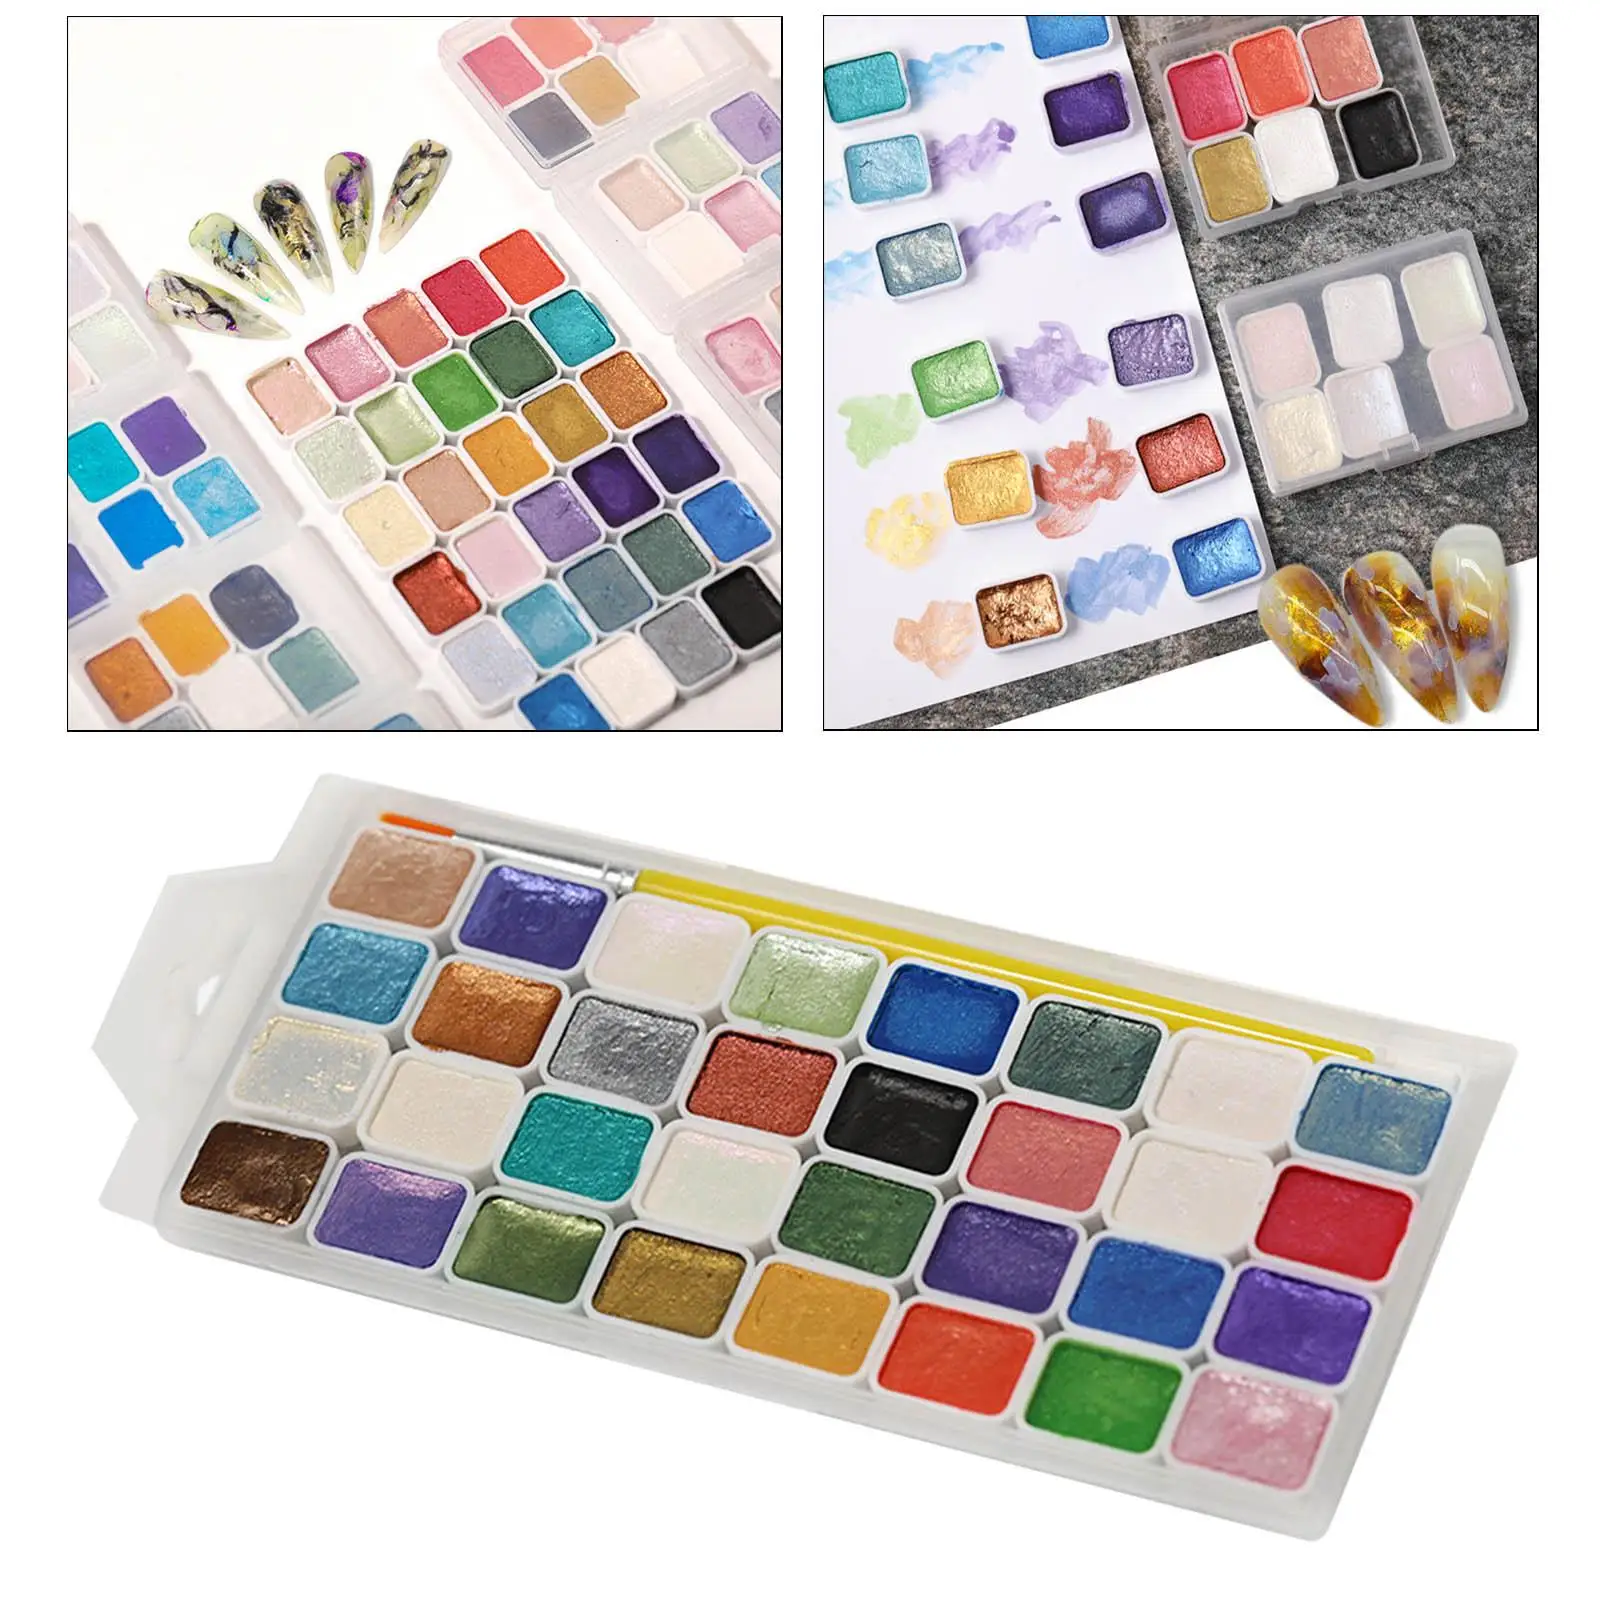 Glitter 32 Colors Solid Watercolor Paints Set Pearlescent DIY Nail Art Metallic Gouache Paint Set for Students Hobbyists